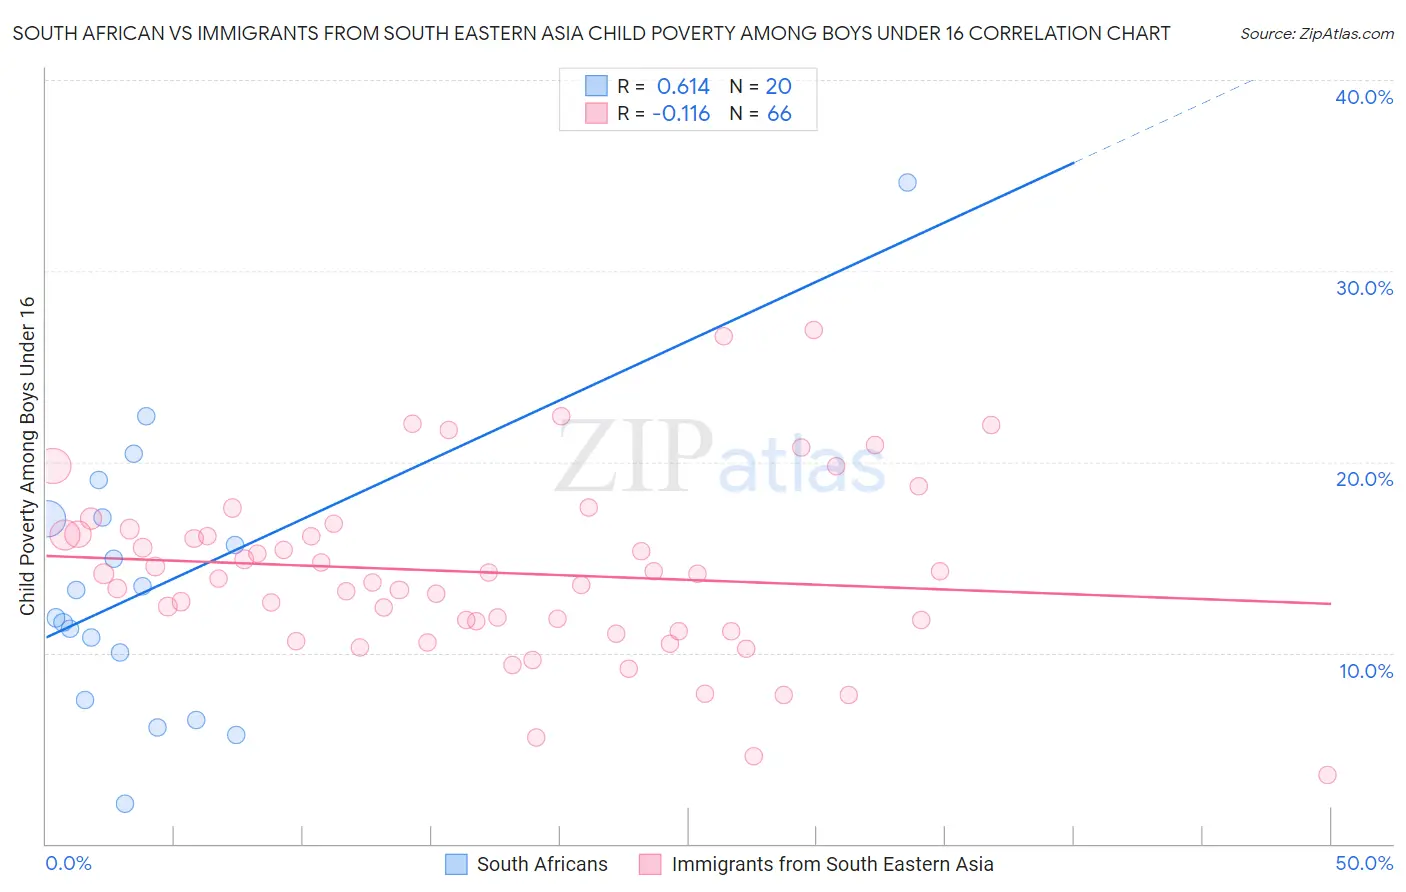 South African vs Immigrants from South Eastern Asia Child Poverty Among Boys Under 16